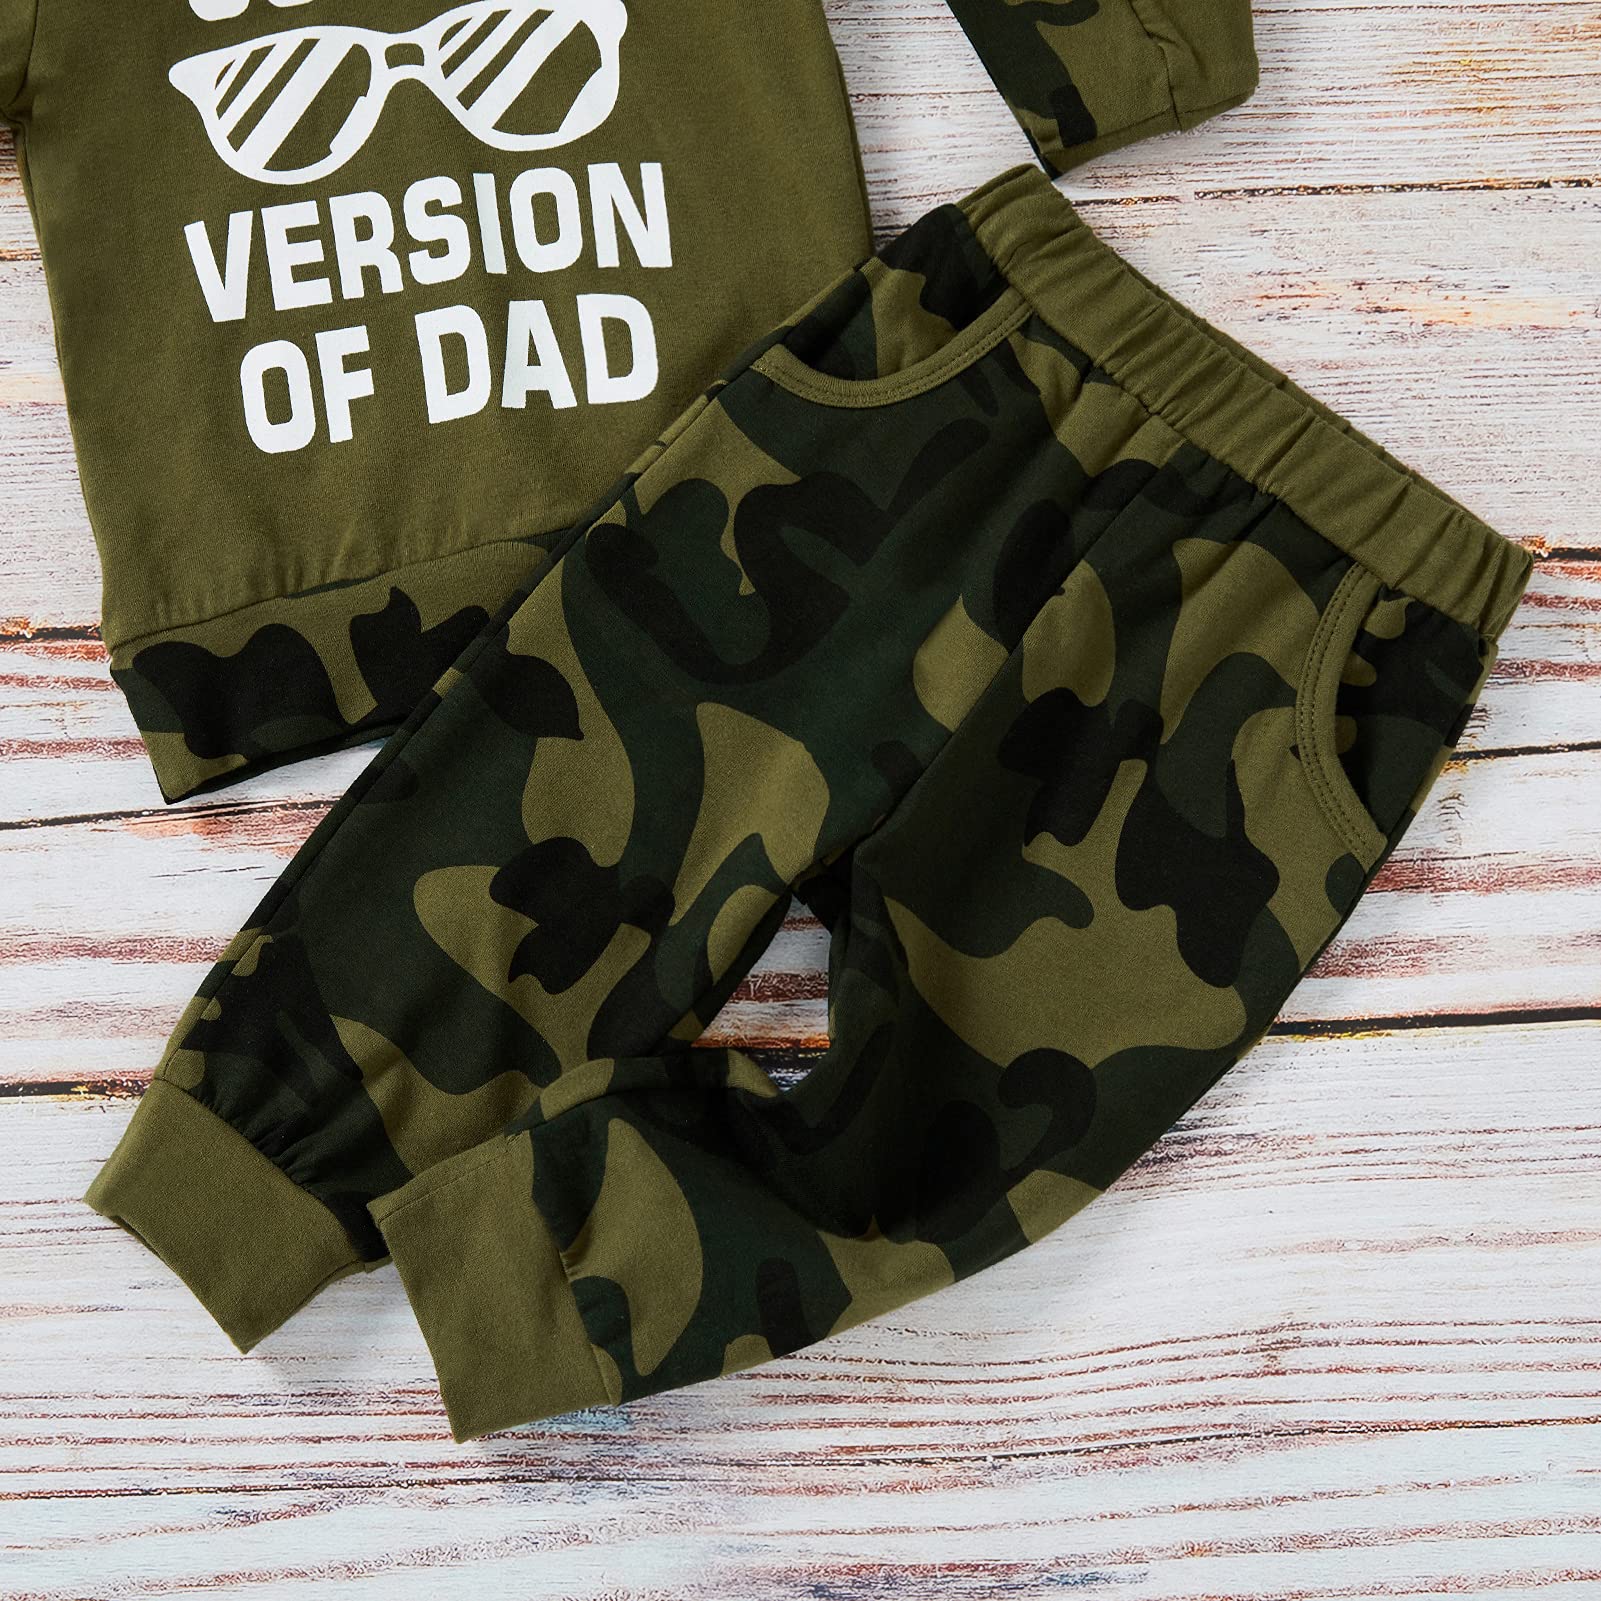 Baby Boy Pant Outfits Cooler Version of Dad Hoodie Camouflage Pants 2Pcs Casual Clothes